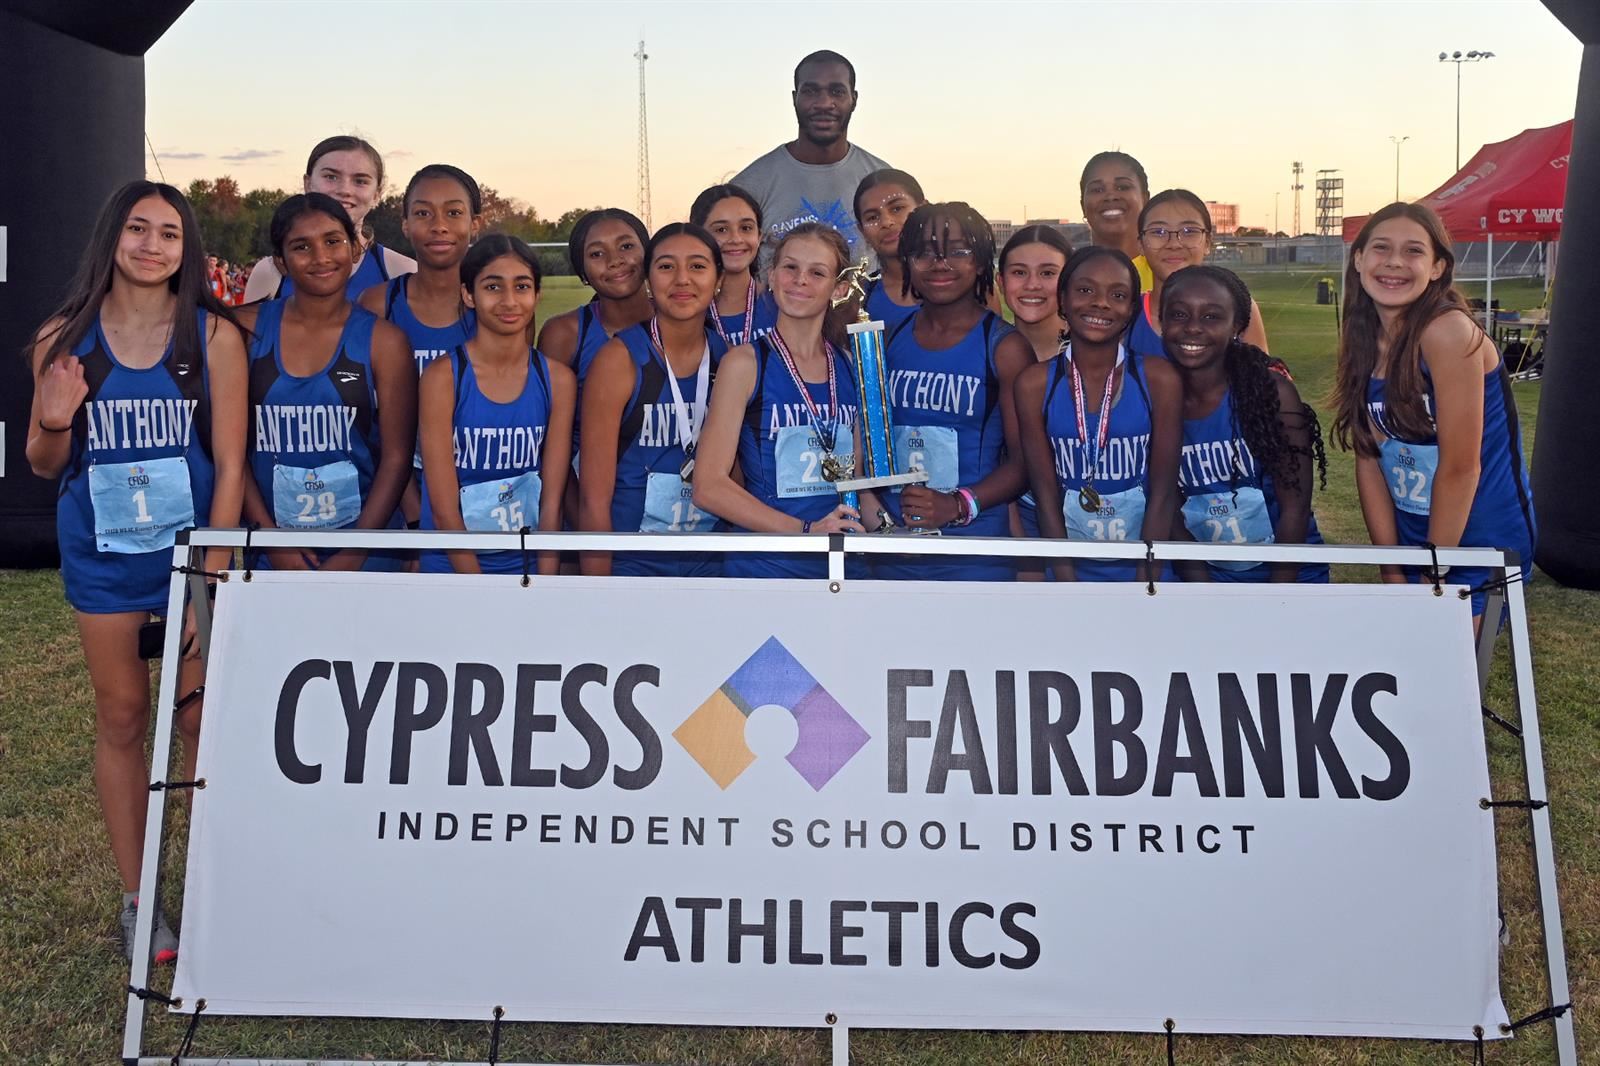 Anthony Middle School won the eighth grade girls’ cross country team championship with a score of 57 points.